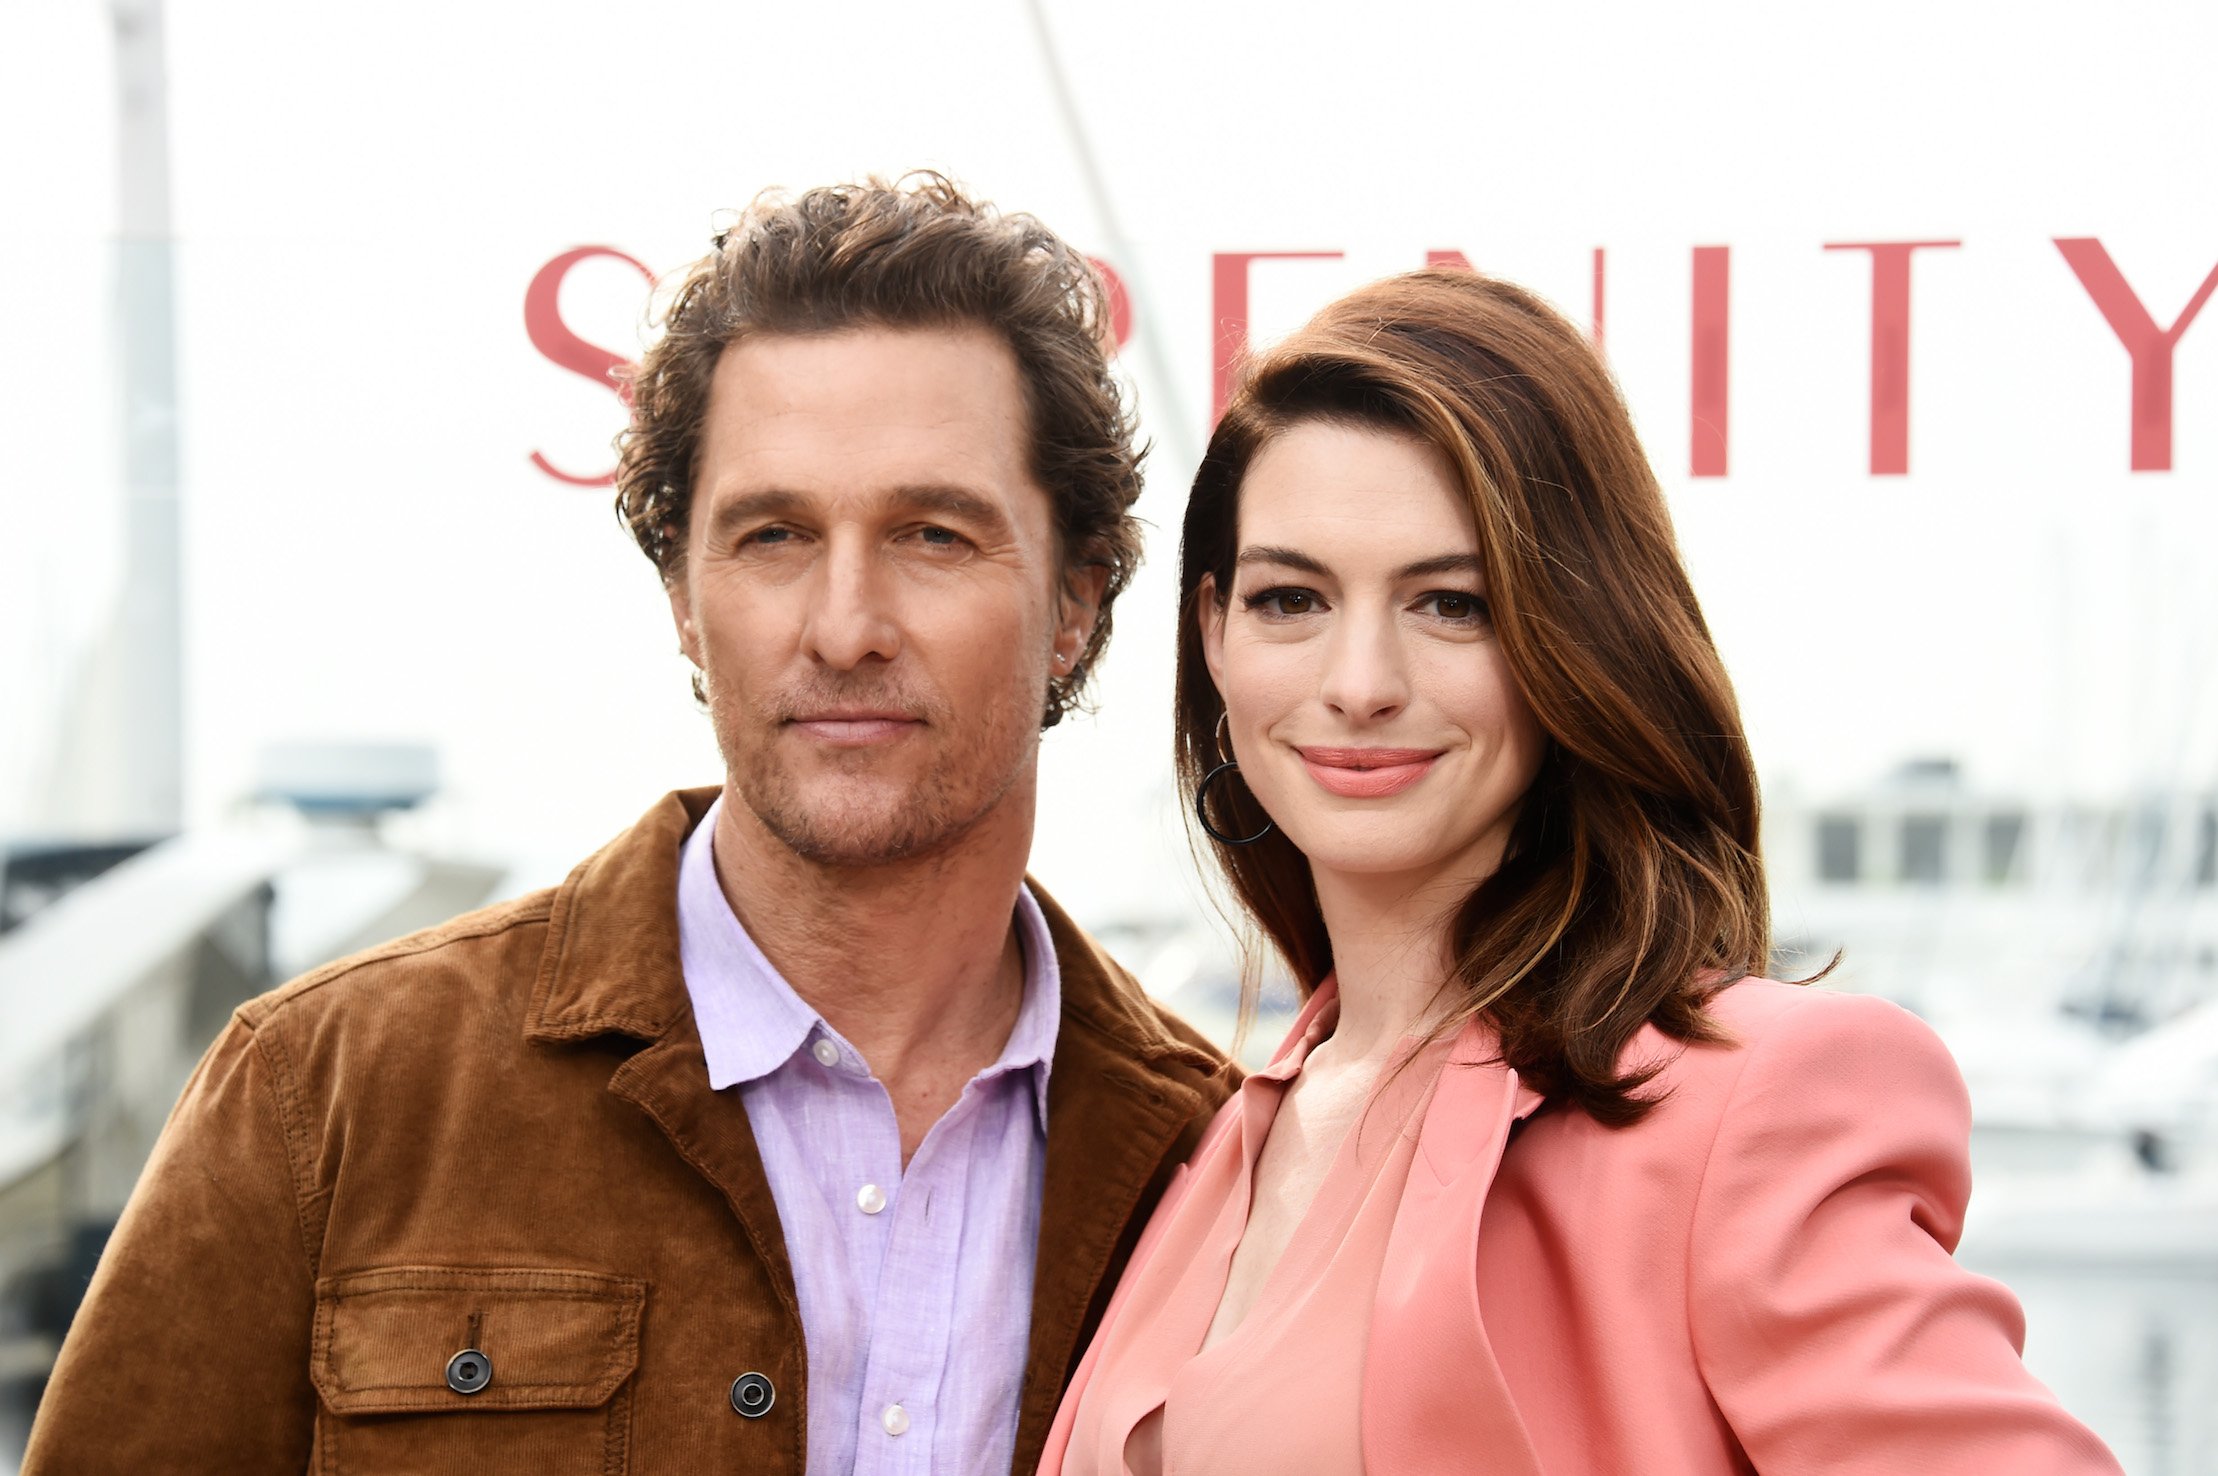 Matthew McConaughey and Anne Hathaway attend the Aviron Pictures 'Serenity' photo call